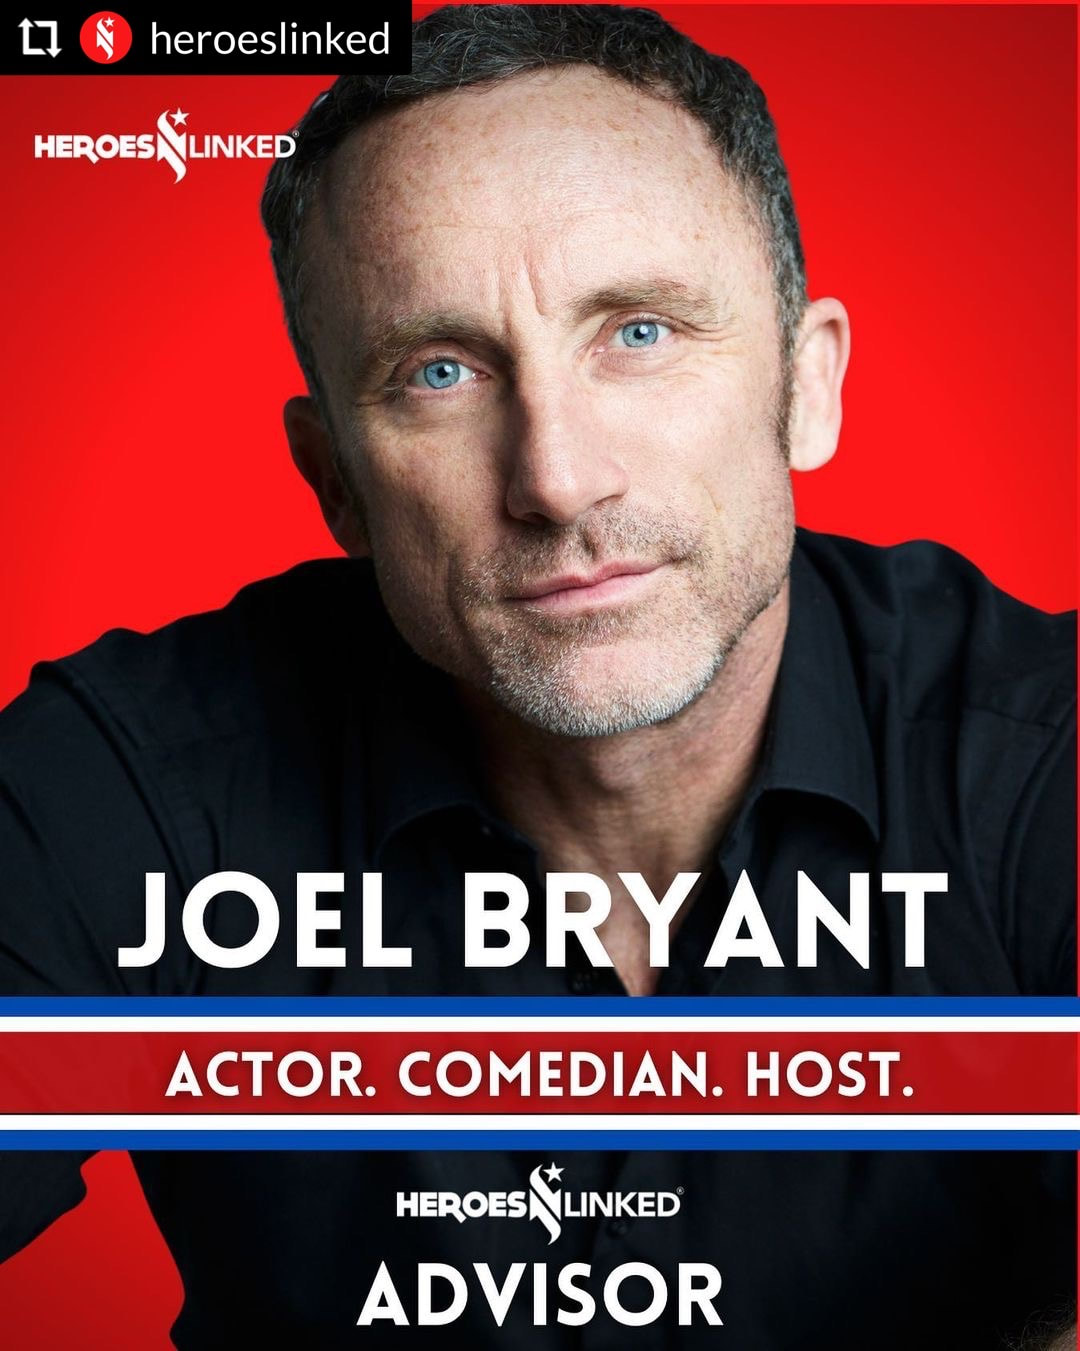 Actor / Comedian / Host Joel Bryant is a voluntary advisor for Heroes Linked